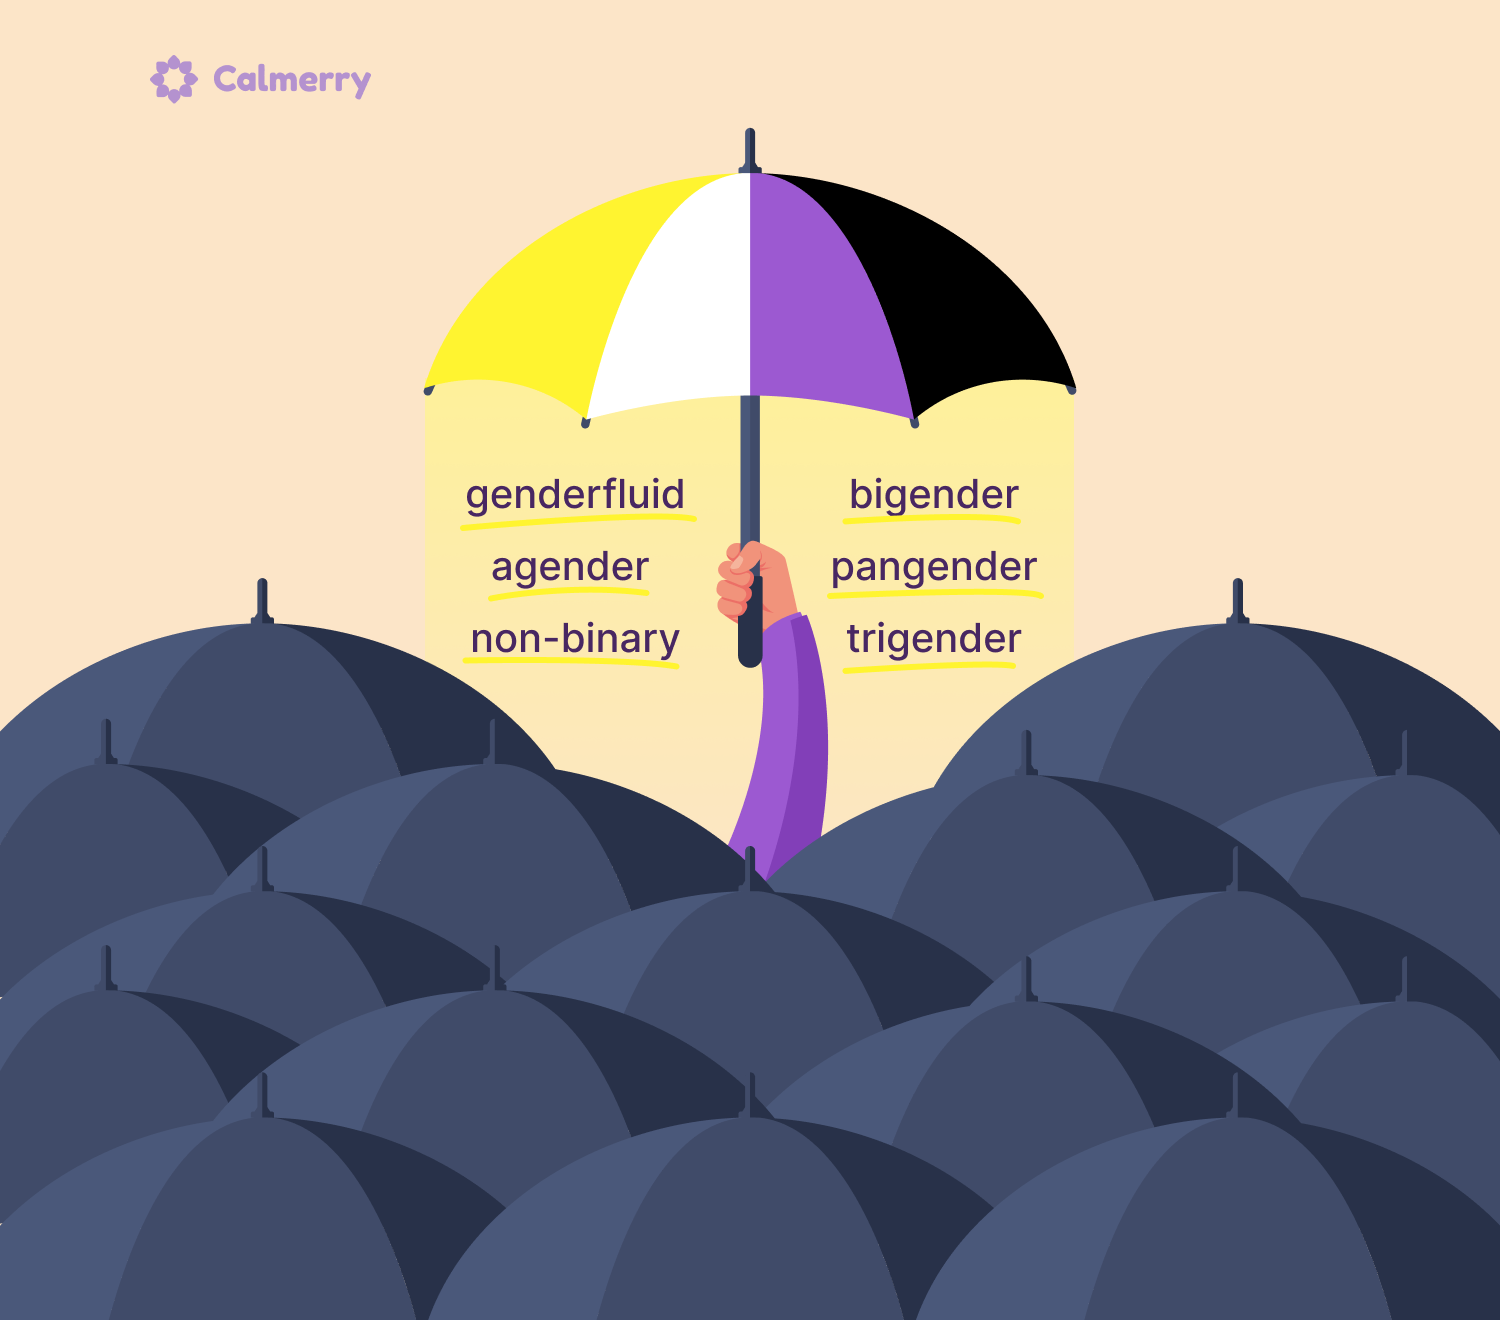 Ultimately, non-binary is an umbrella term to describe people whose gender identity cannot be directly mapped to those of a “man” or a “woman.”